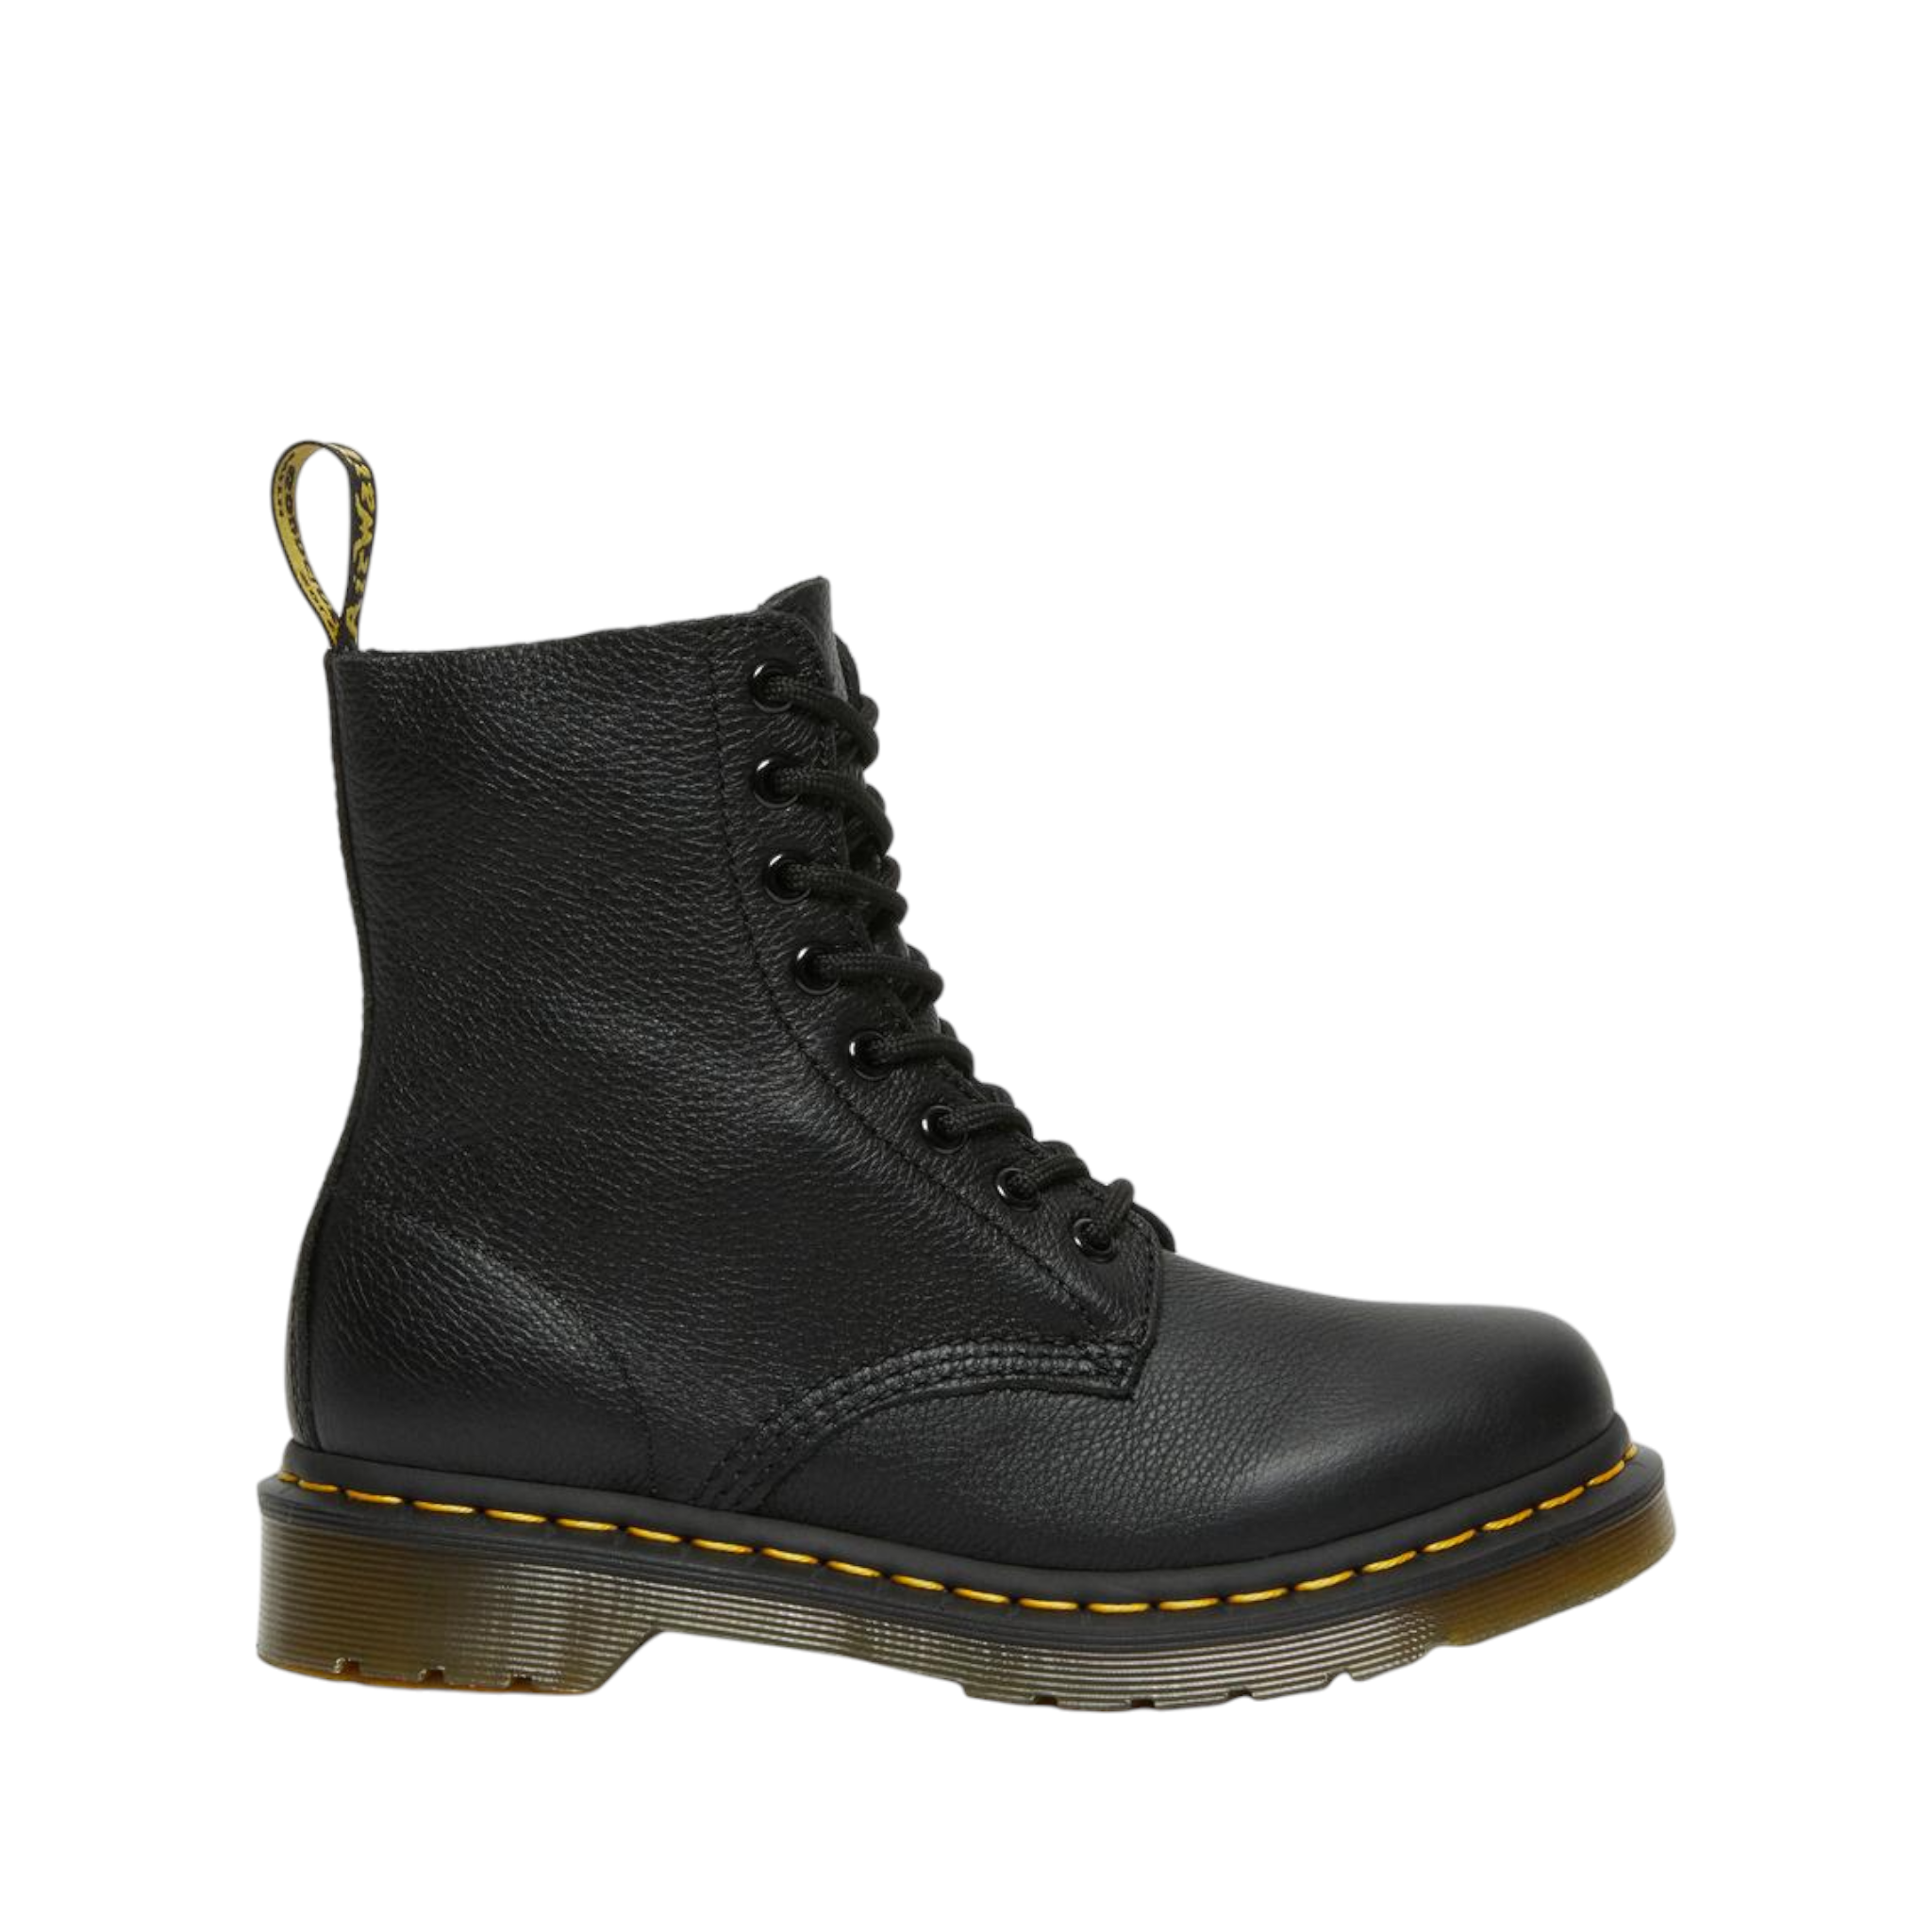 Shop Pascal 8 Eye Dr Martens - with shoe&amp;me - from Dr. Martens - Boots - Boot, Summer, Winter, Womens - [collection]